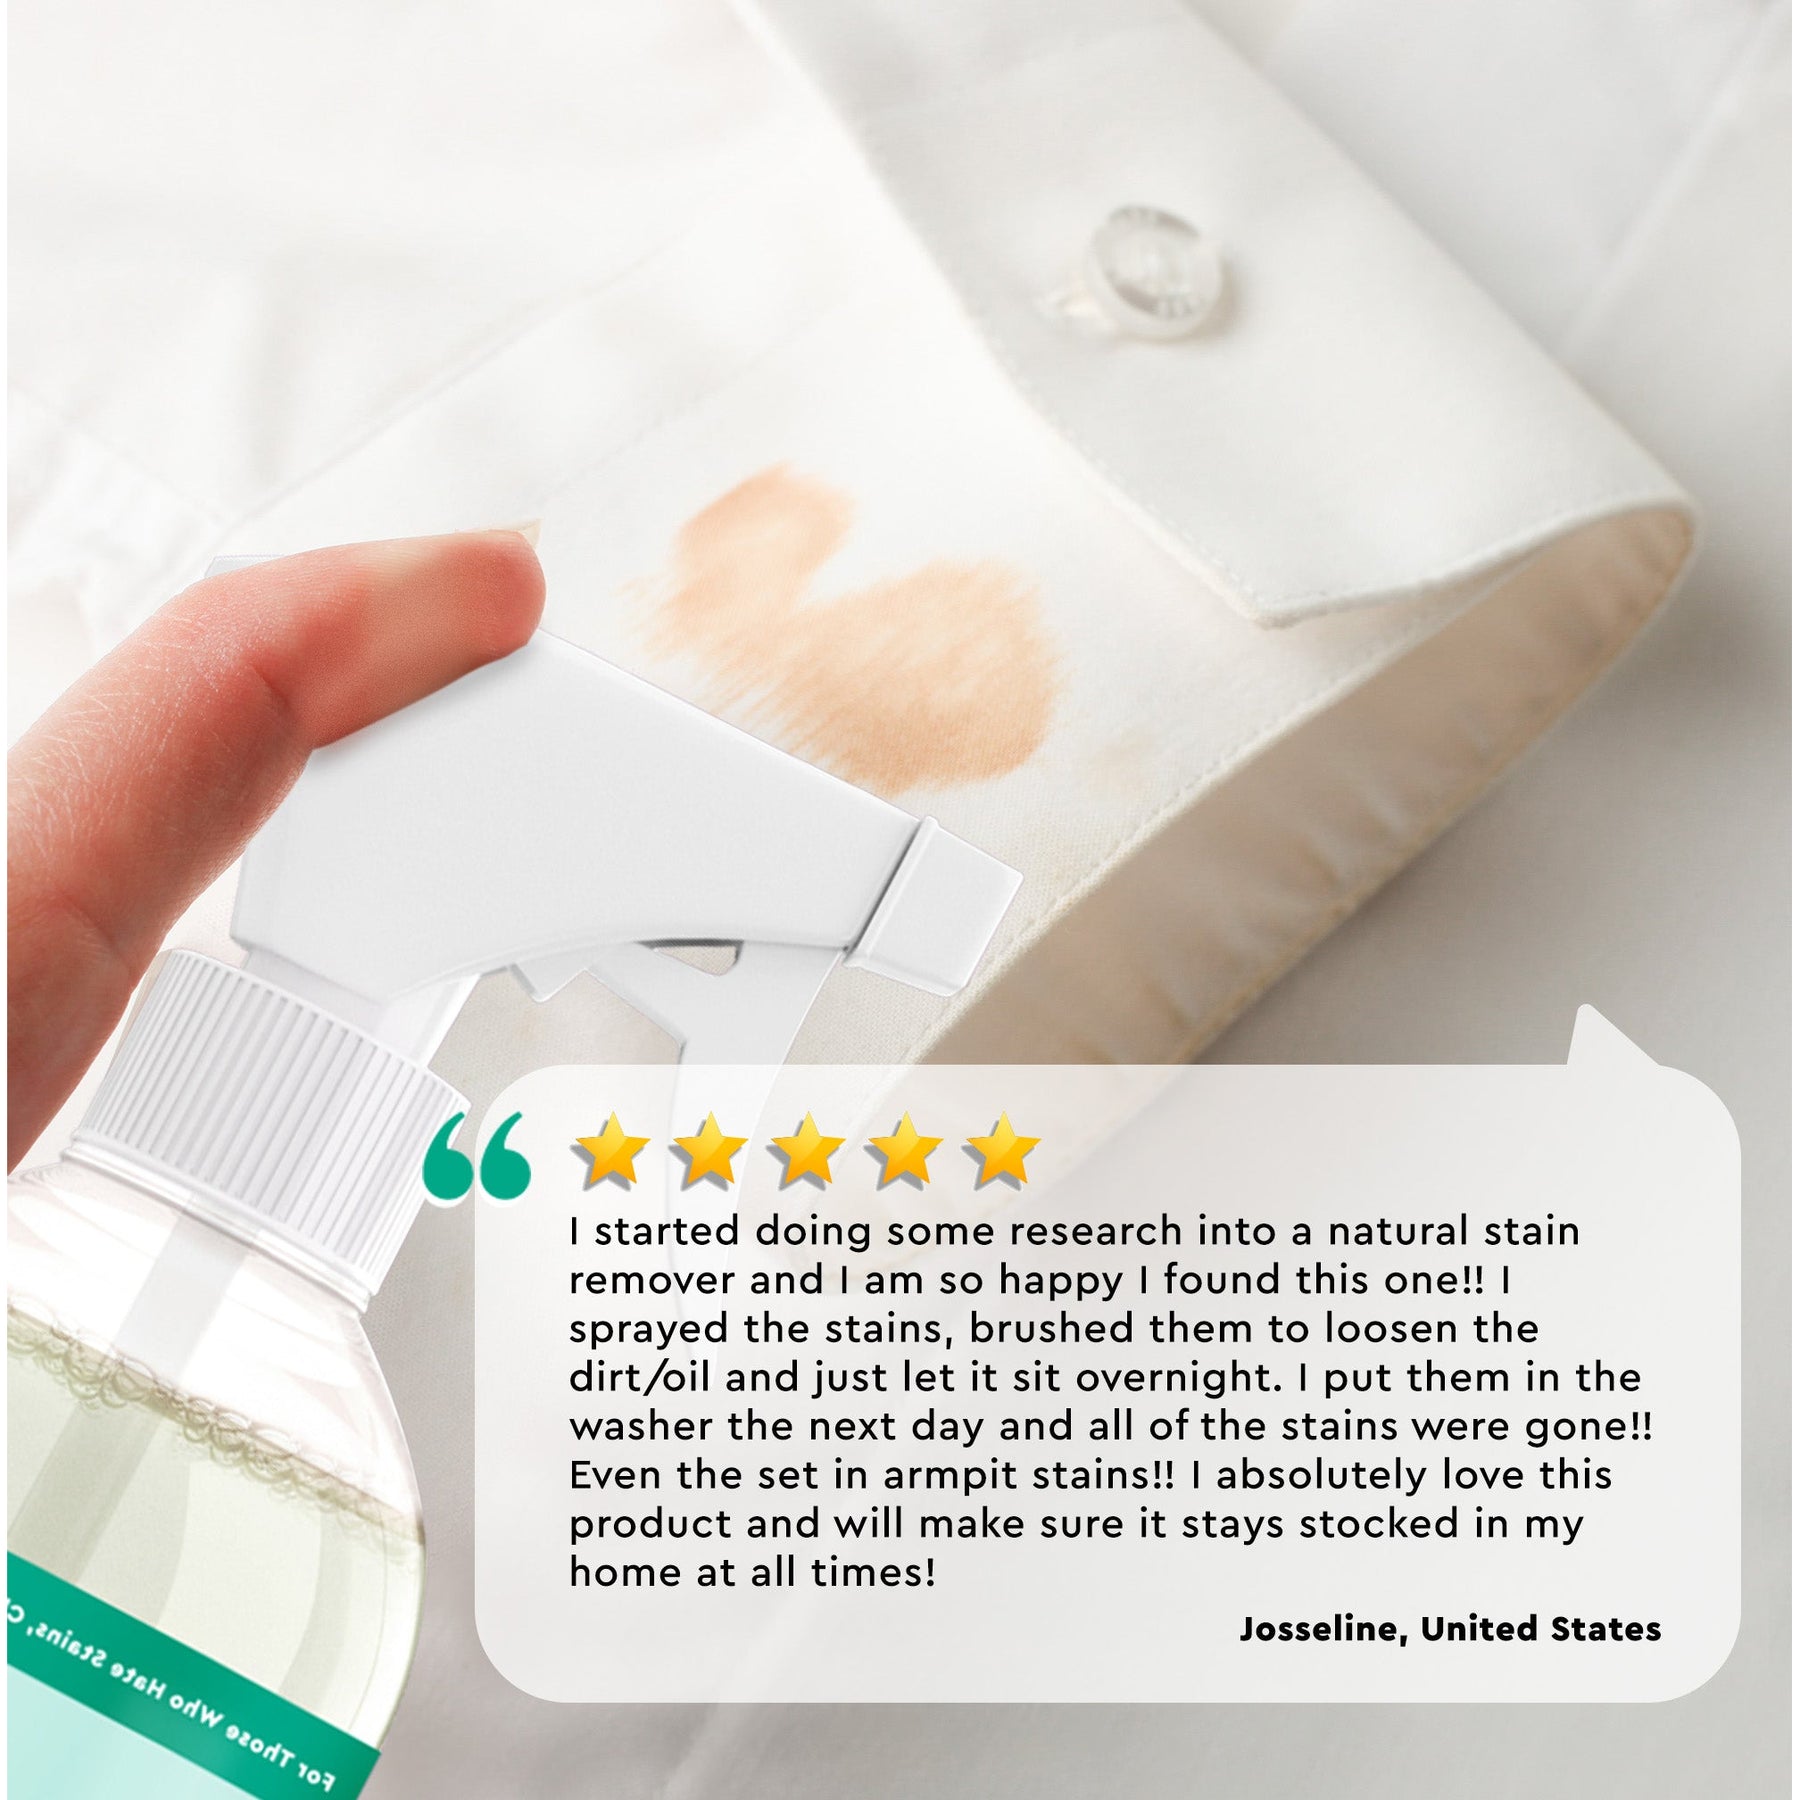 Natural Laundry Stain Remover on amazon